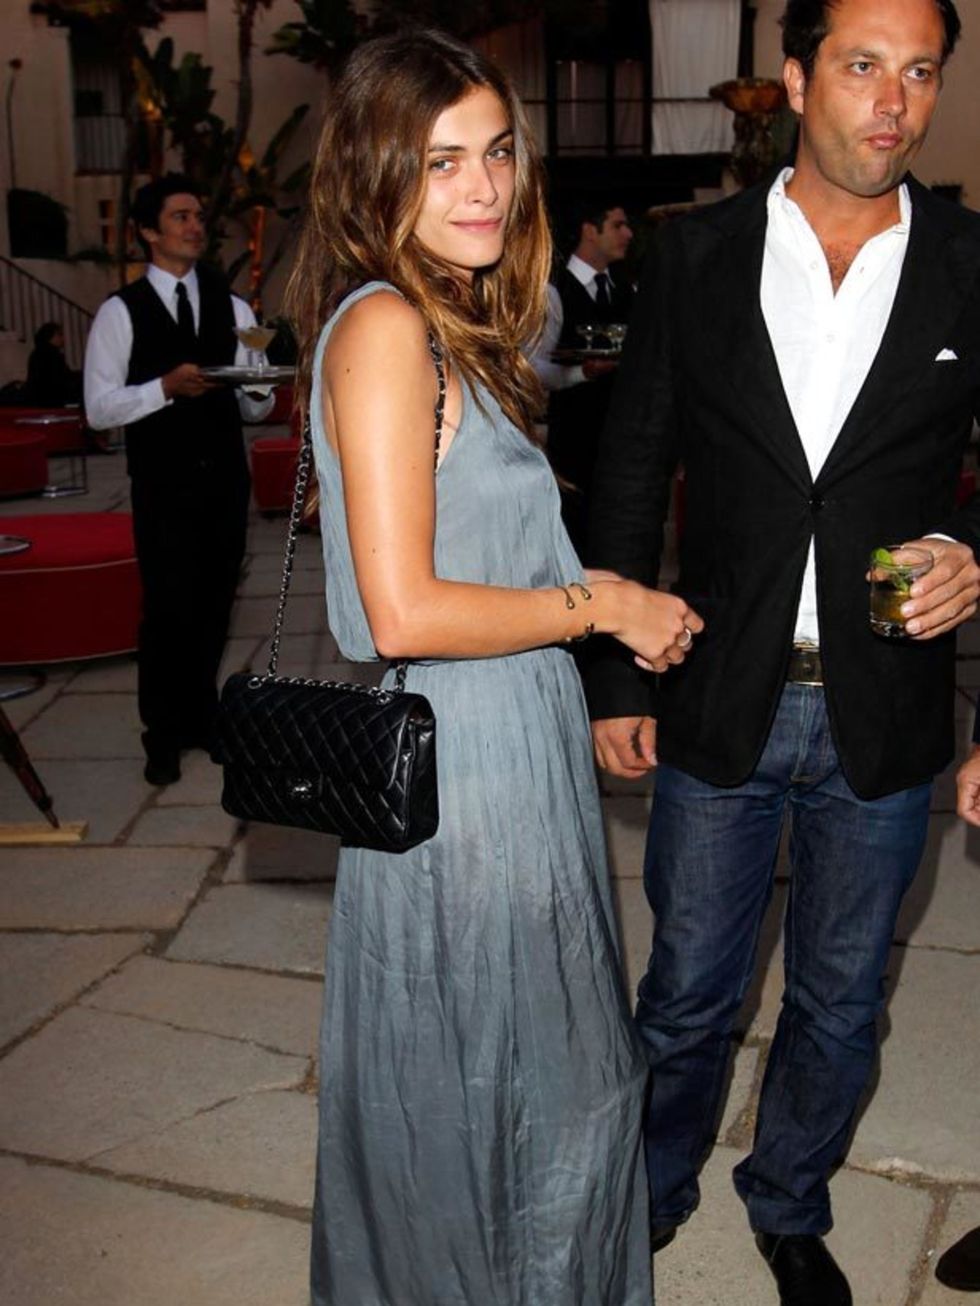 <p><a href="http://www.elleuk.com/starstyle/style-files/(section)/elisa-sednaoui">Elisa Sednaoui</a> wearing the classic long-handled <a href="http://www.elleuk.com/catwalk/collections/chanel/">Chanel</a> 2.55 bag</p>